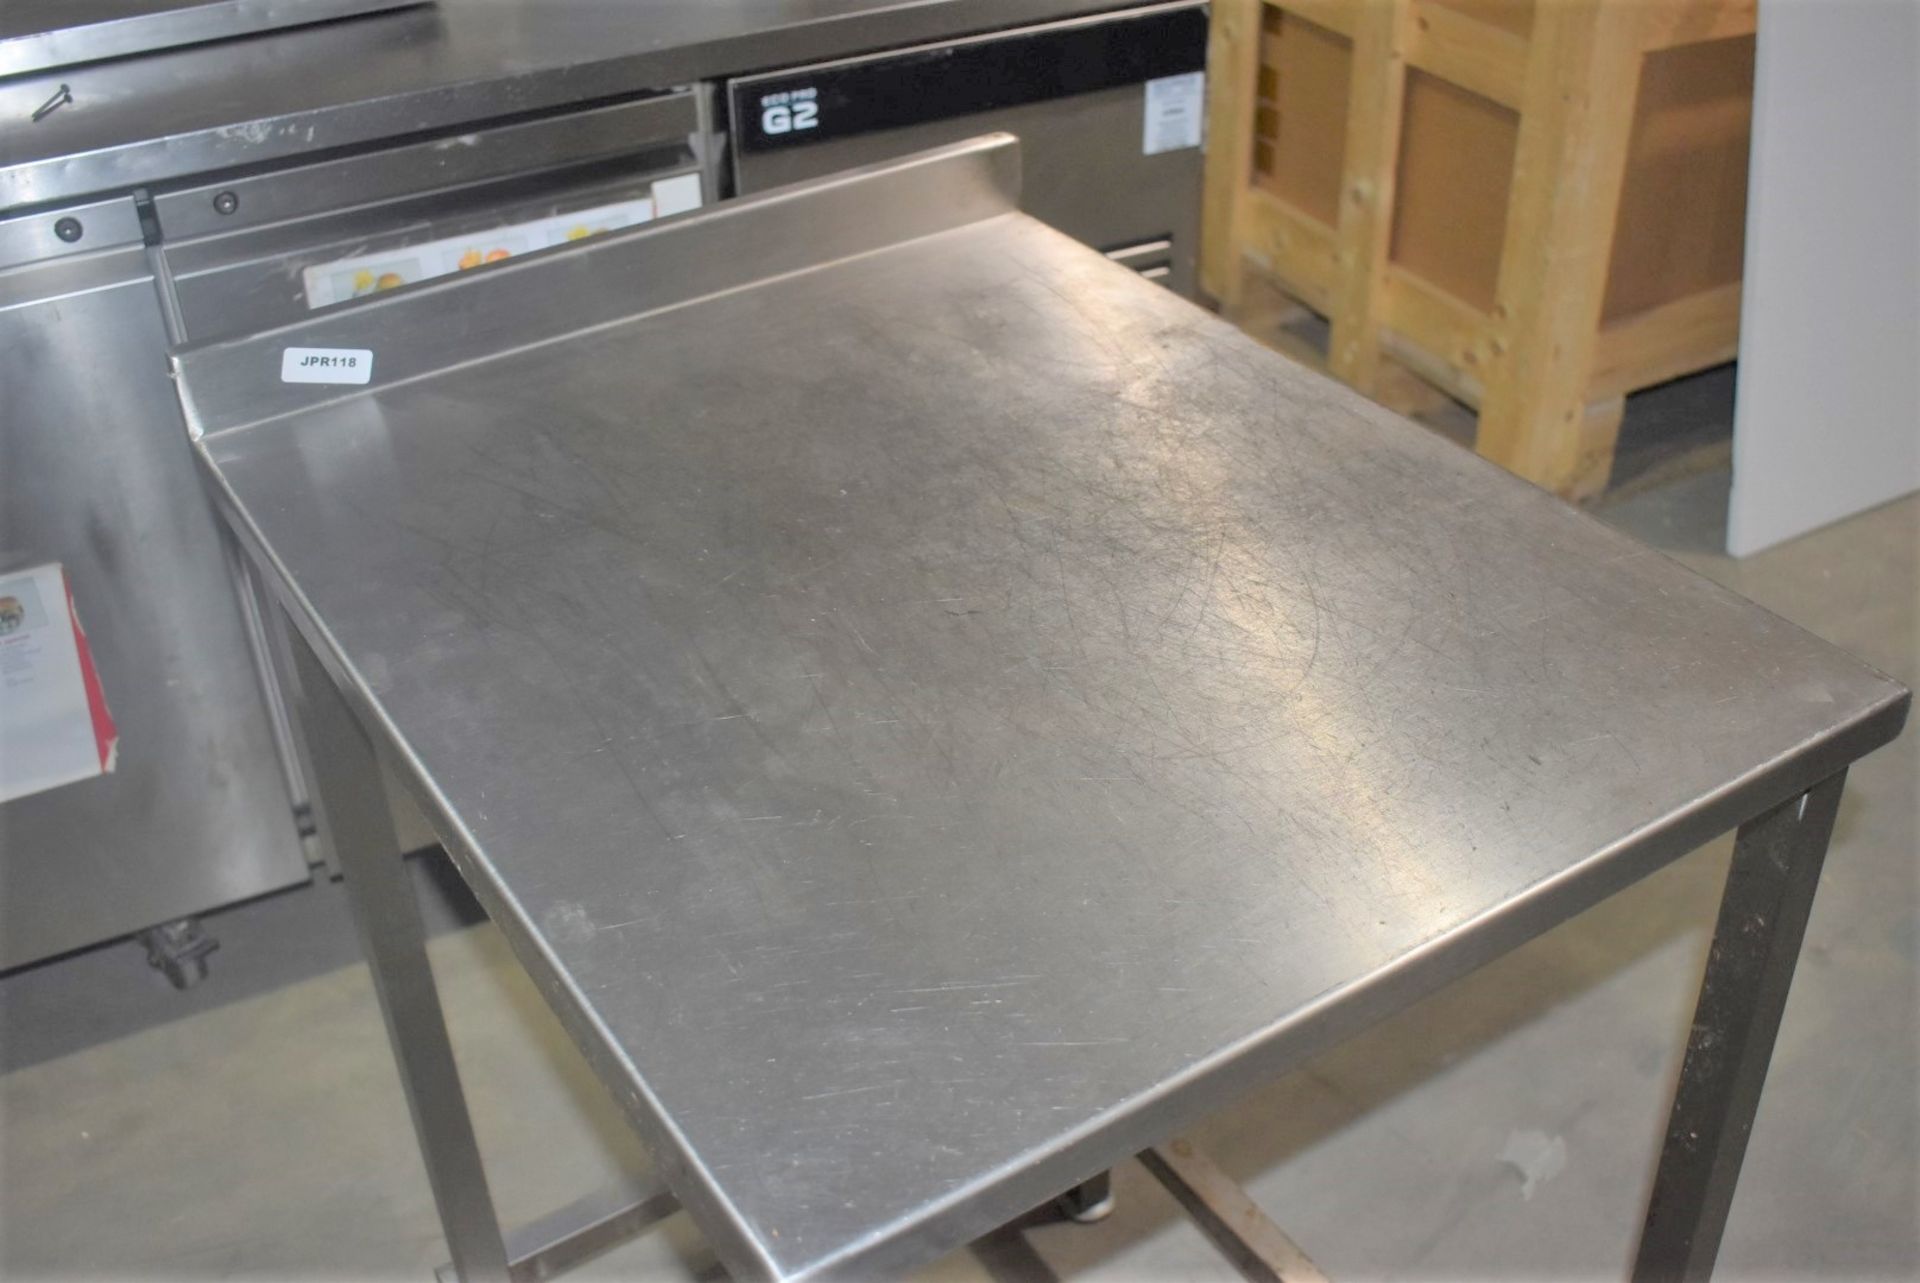 1 x Stainless Steel Prep Table - Size: H87 x W55 x D70 cms - Image 2 of 4